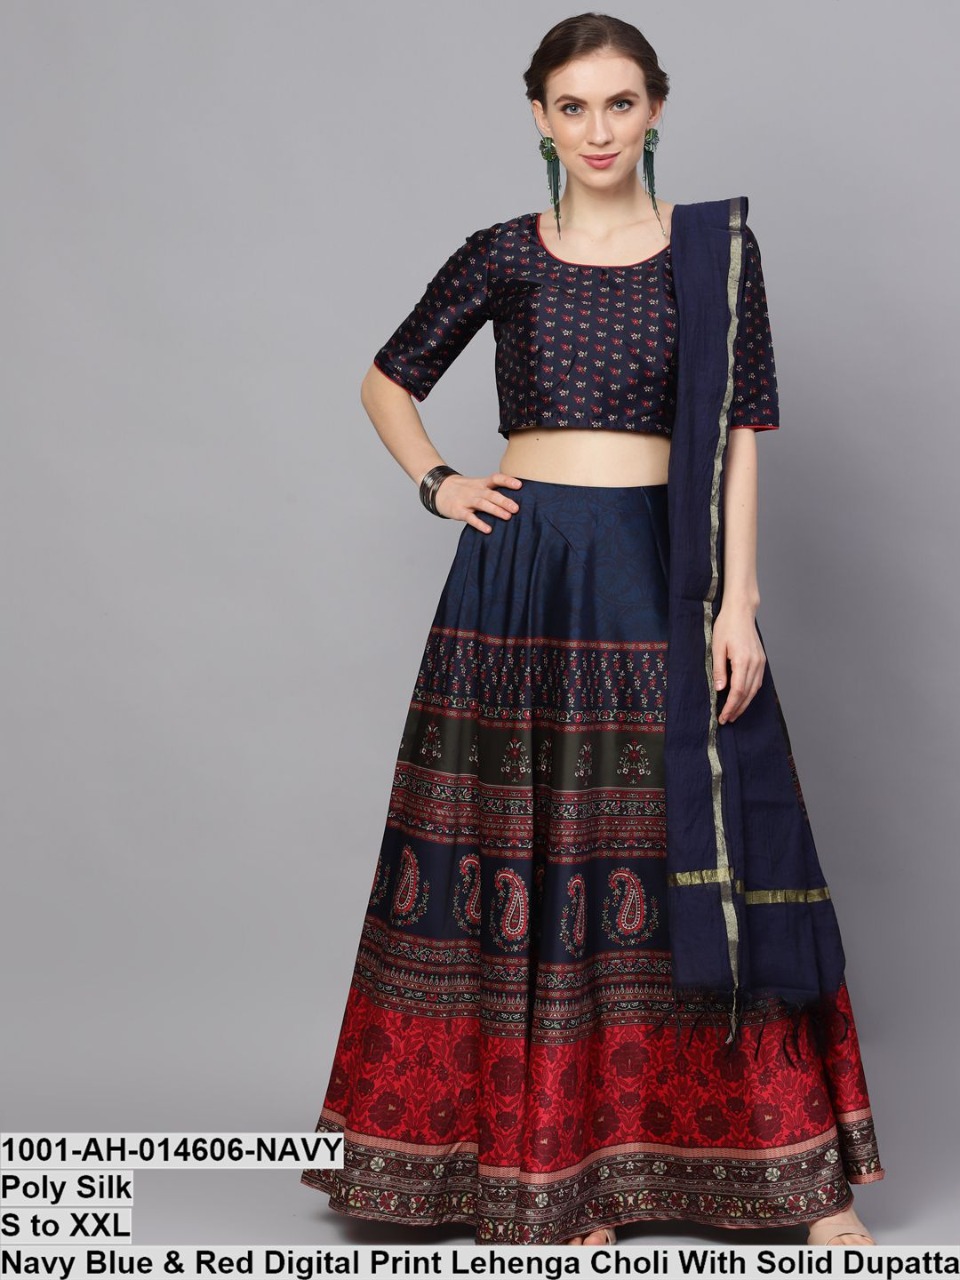 Women's Silk With bandhani And Foil Print Lehenga choli Set (NAVY BLUE) :  Amazon.in: Clothing & Accessories